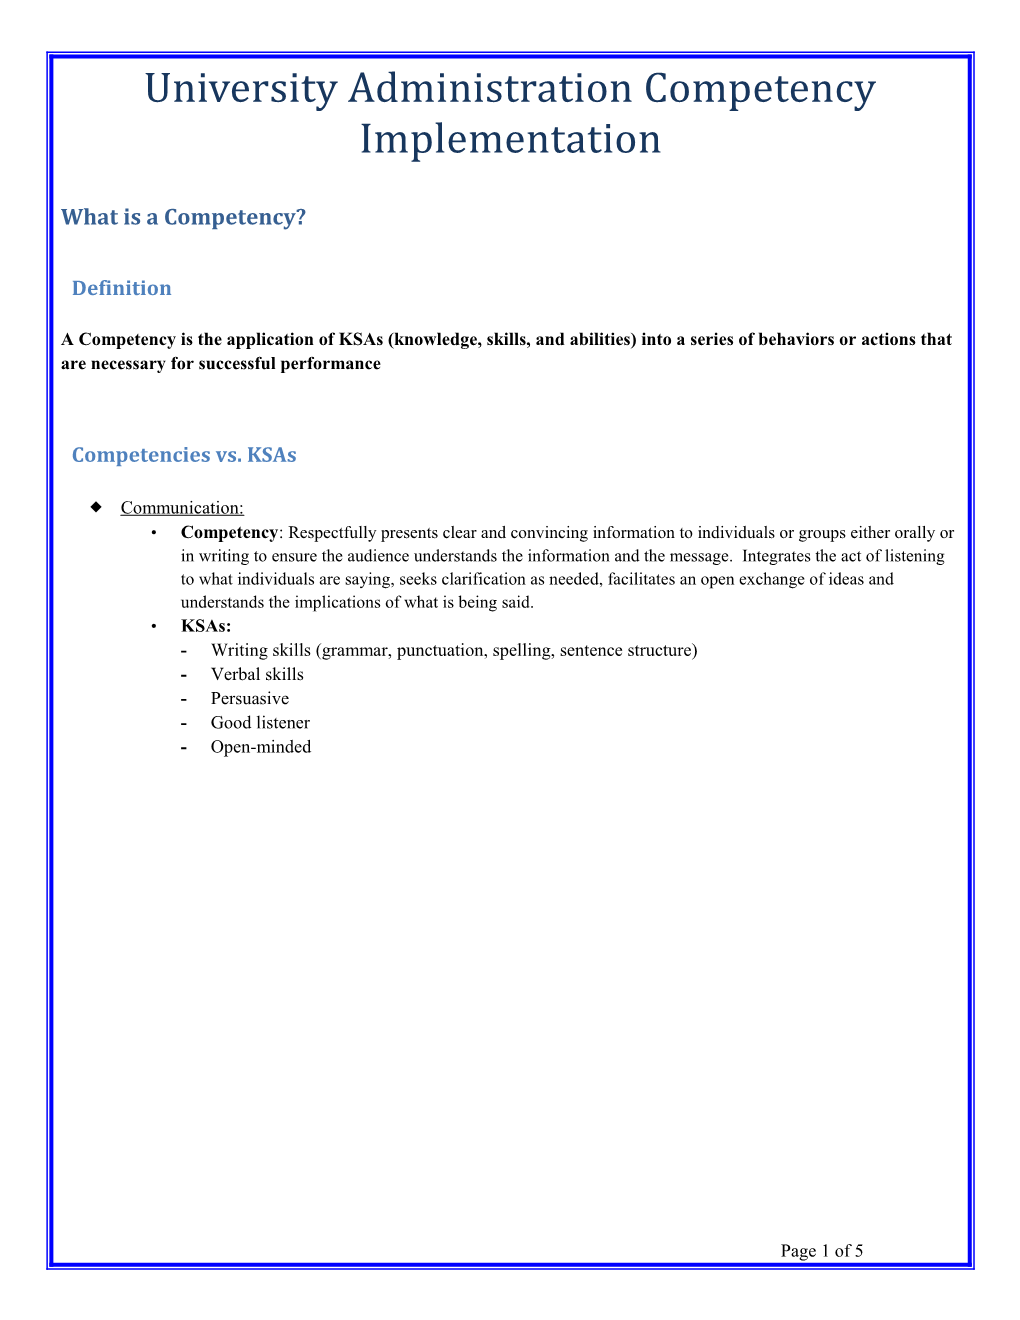 University Administration Competency Implementation